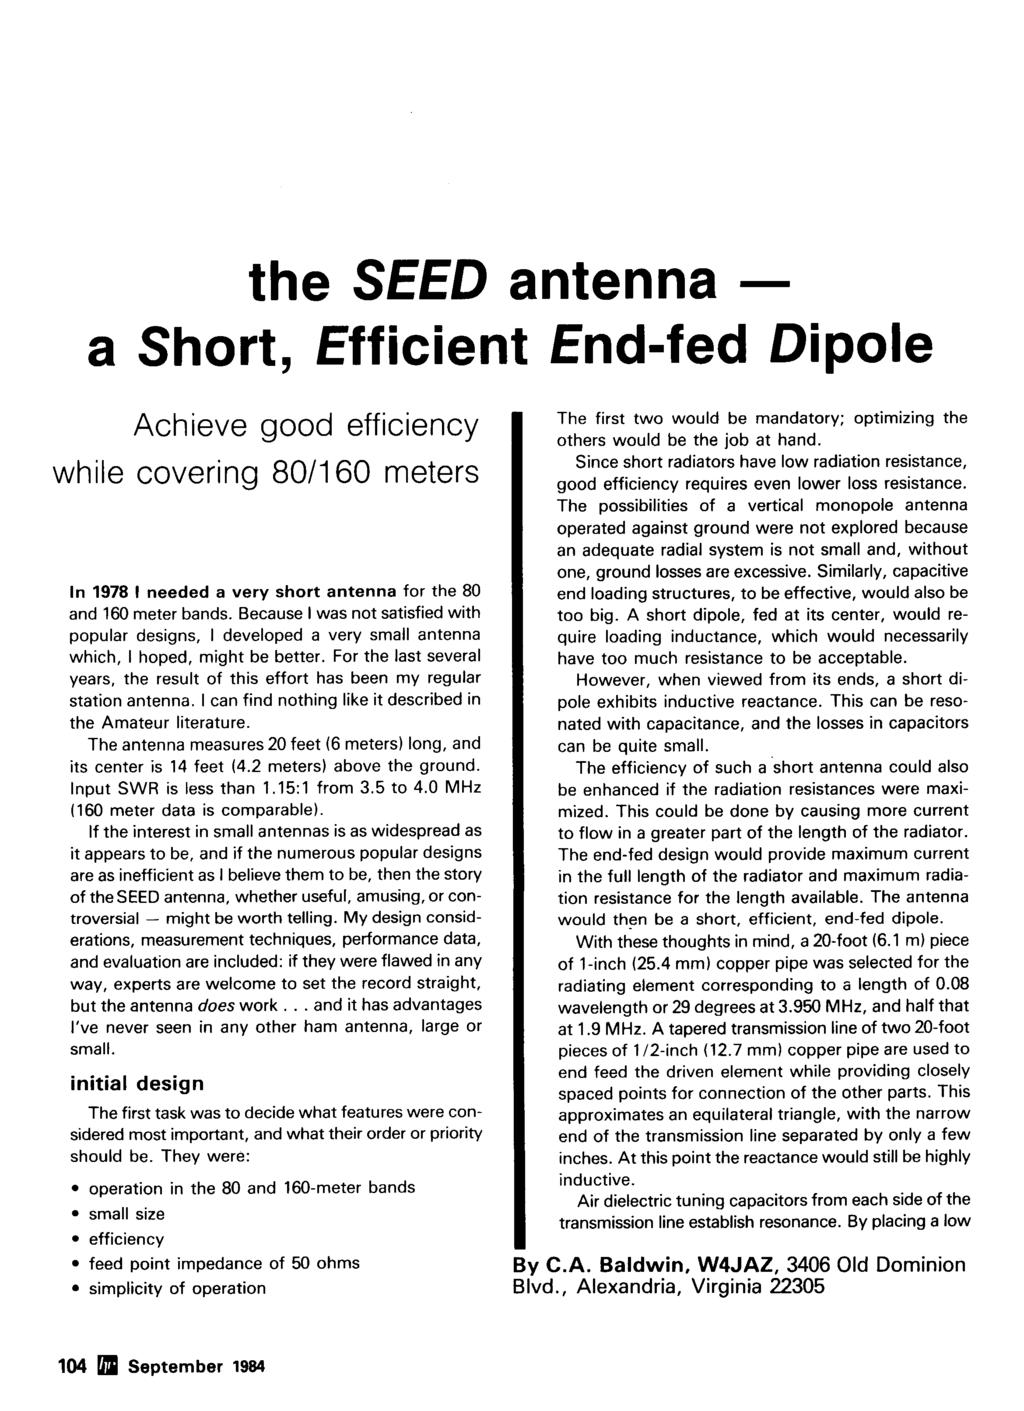 the SEED antenna - a Short, Efficient End-fed Dipole Achieve good efficiency while covering 8011 60 meters n 1978 1 needed a very short antenna for the 80 and 160 meter bands.